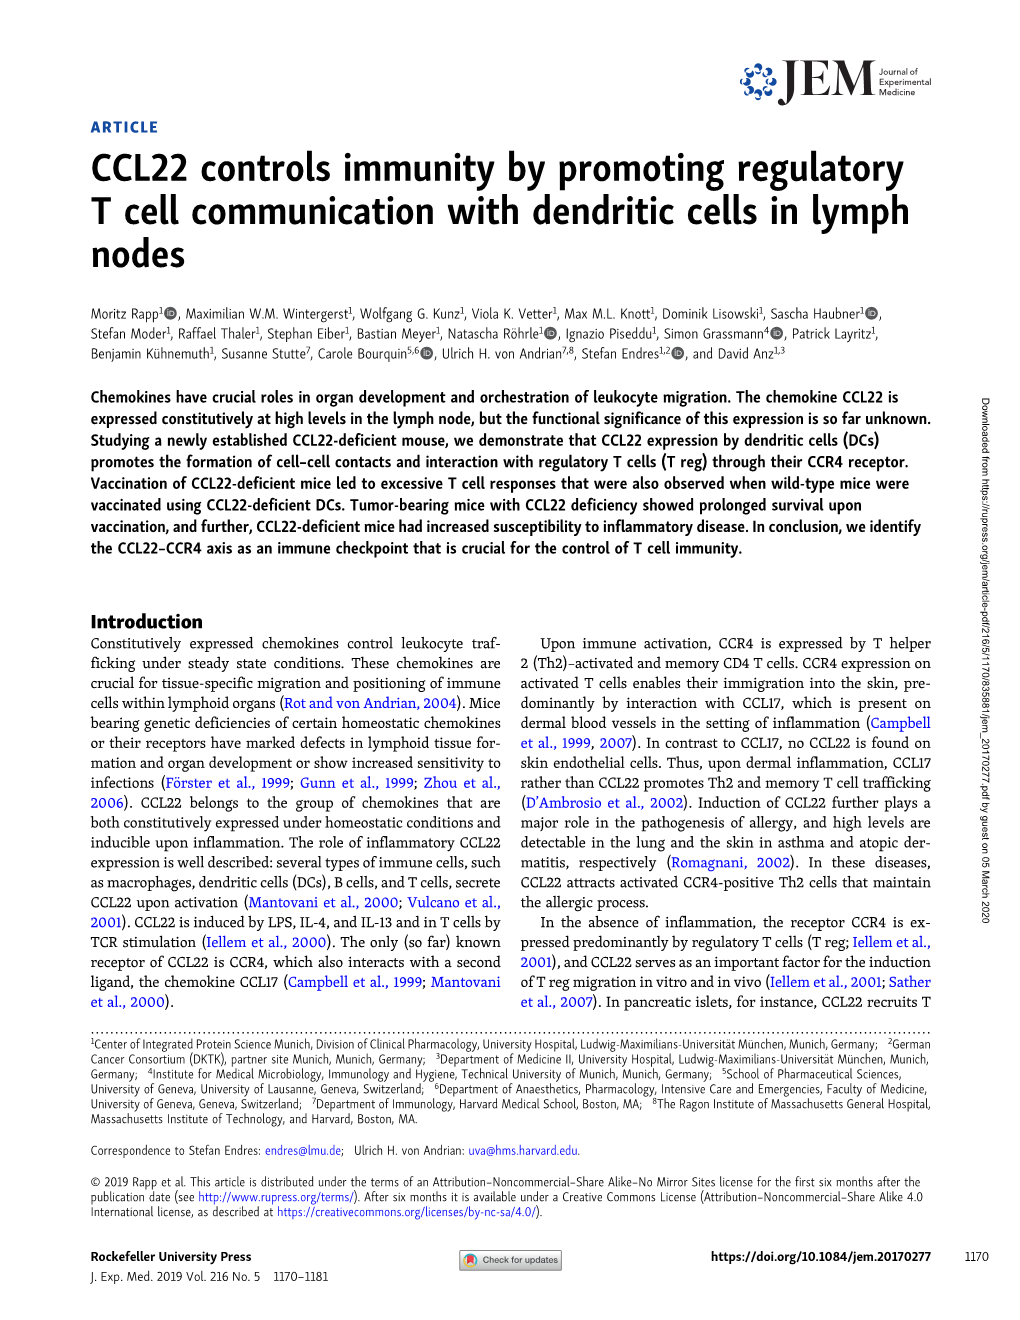 CCL22 Controls Immunity by Promoting Regulatory T Cell Communication with Dendritic Cells in Lymph Nodes